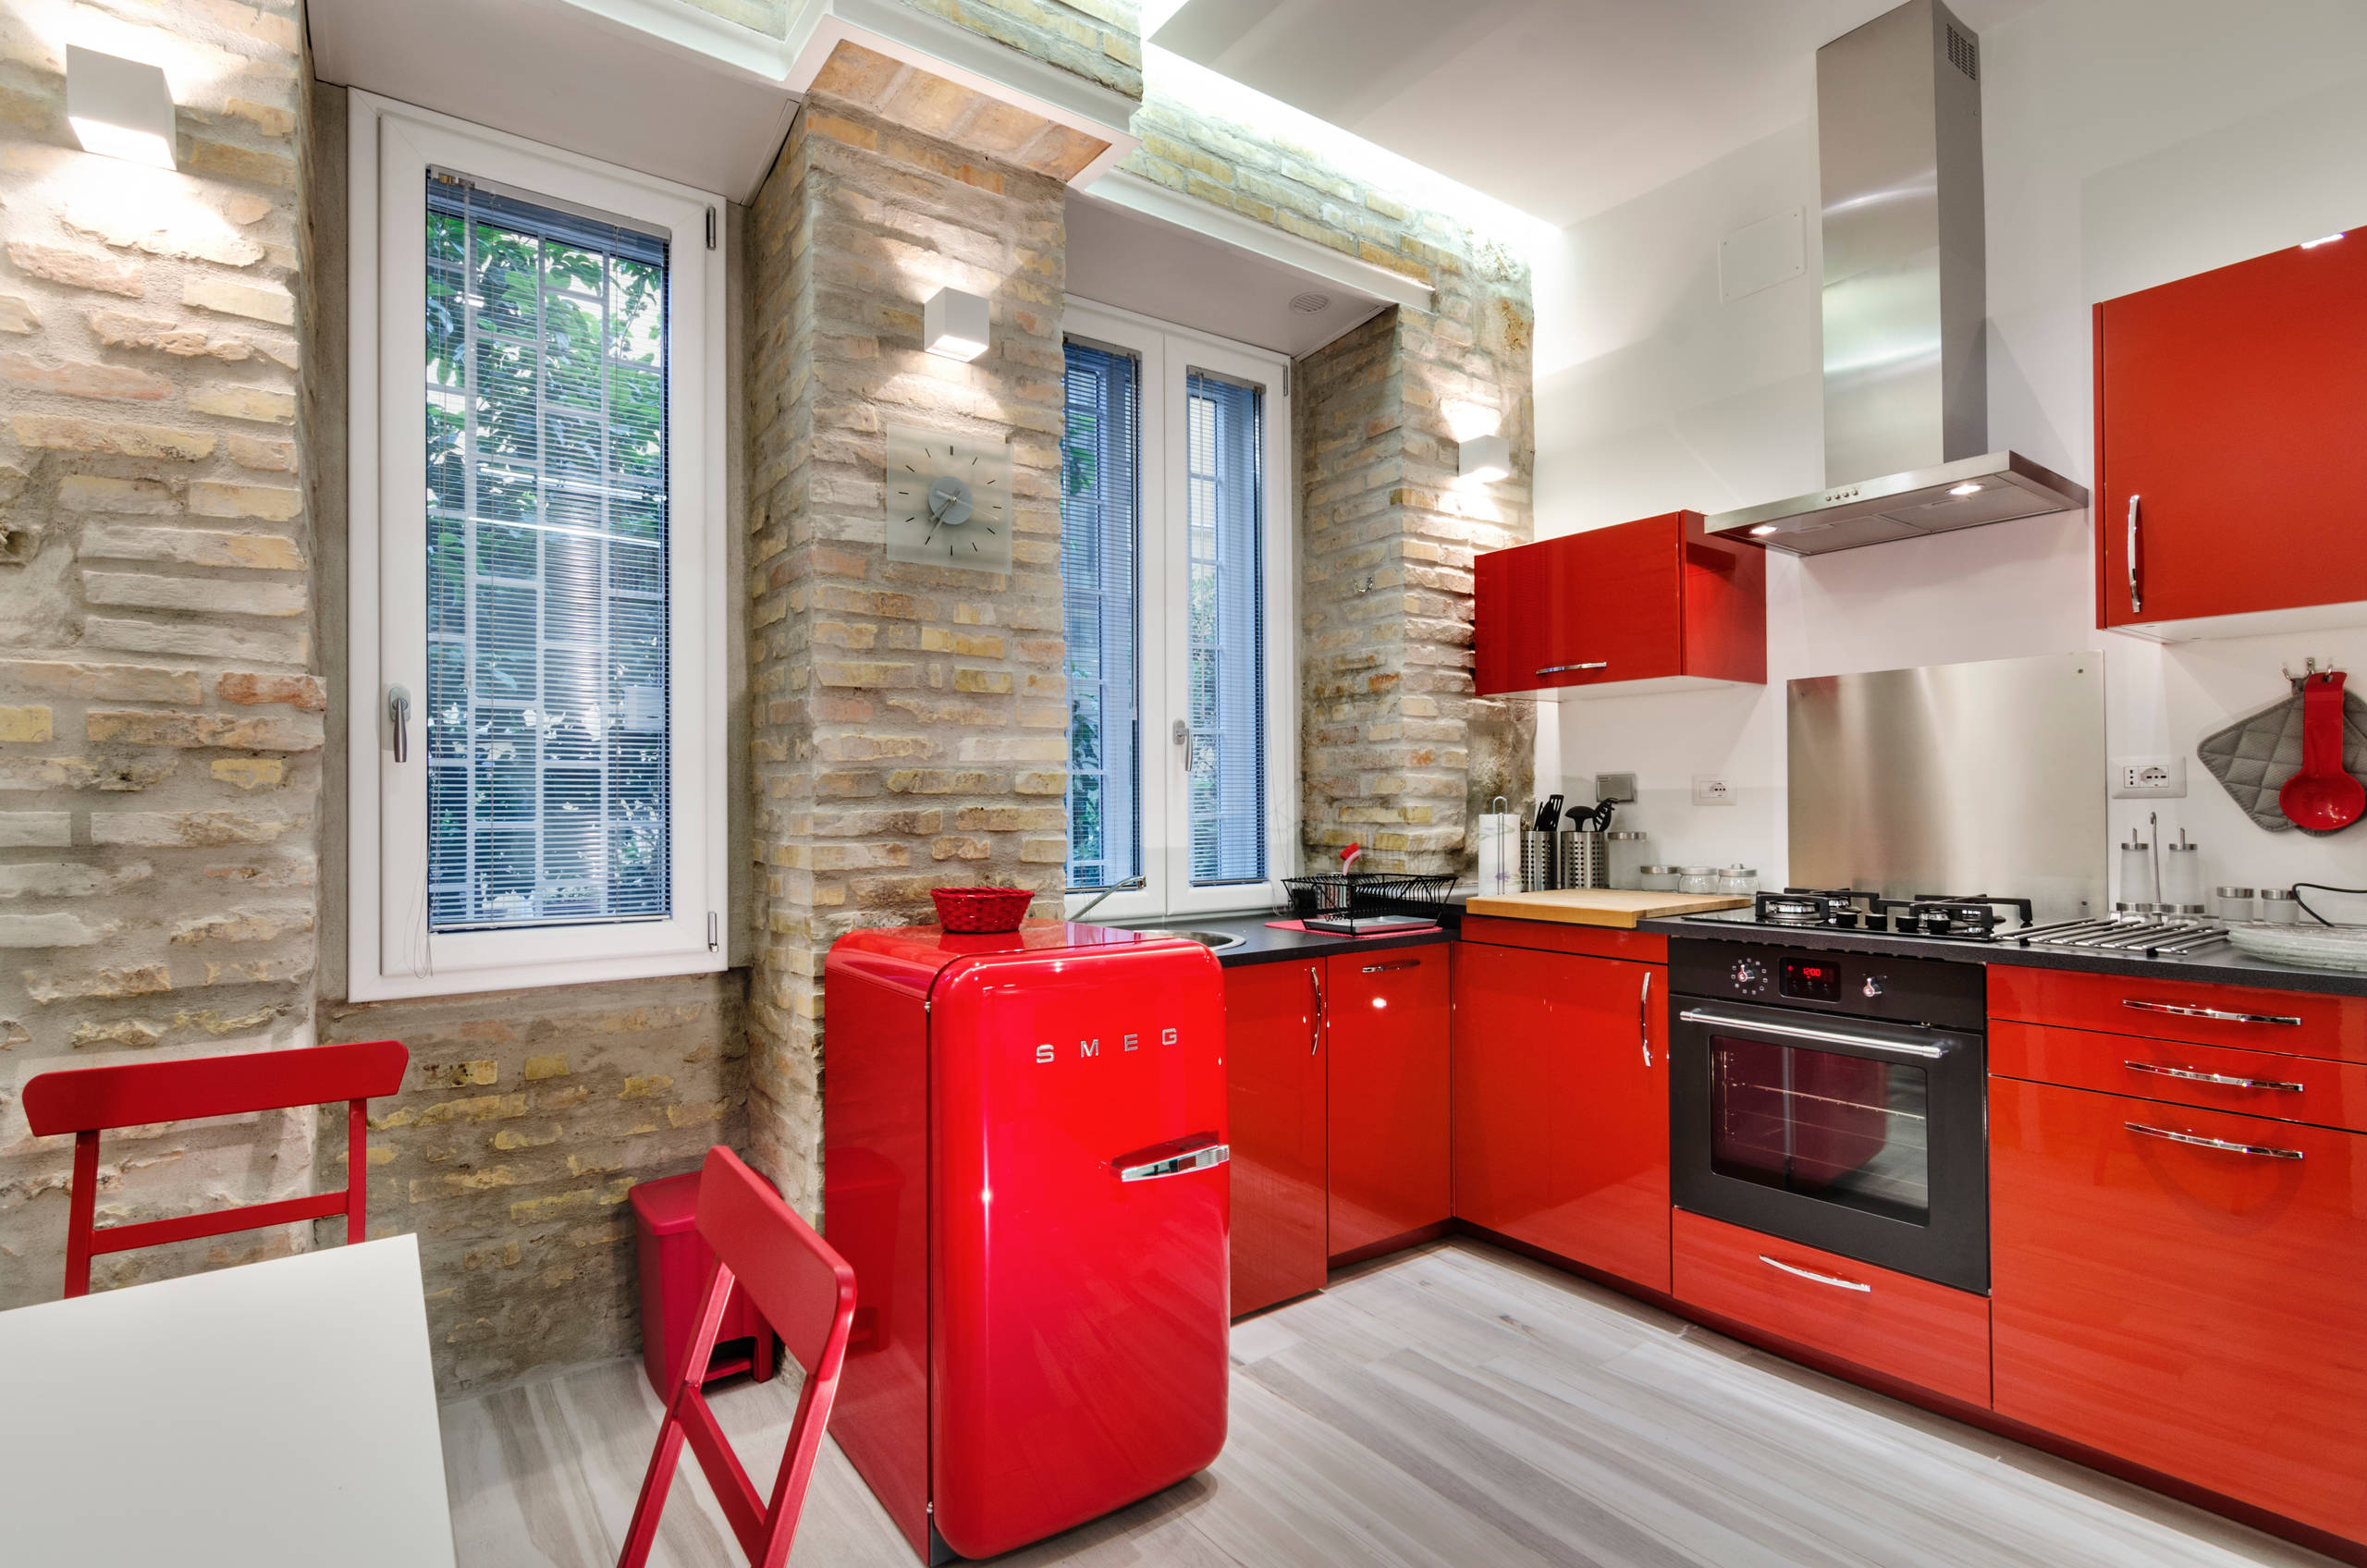 75 Kitchen with Red Cabinets and Black Appliances Ideas You'll Love -  December, 2023